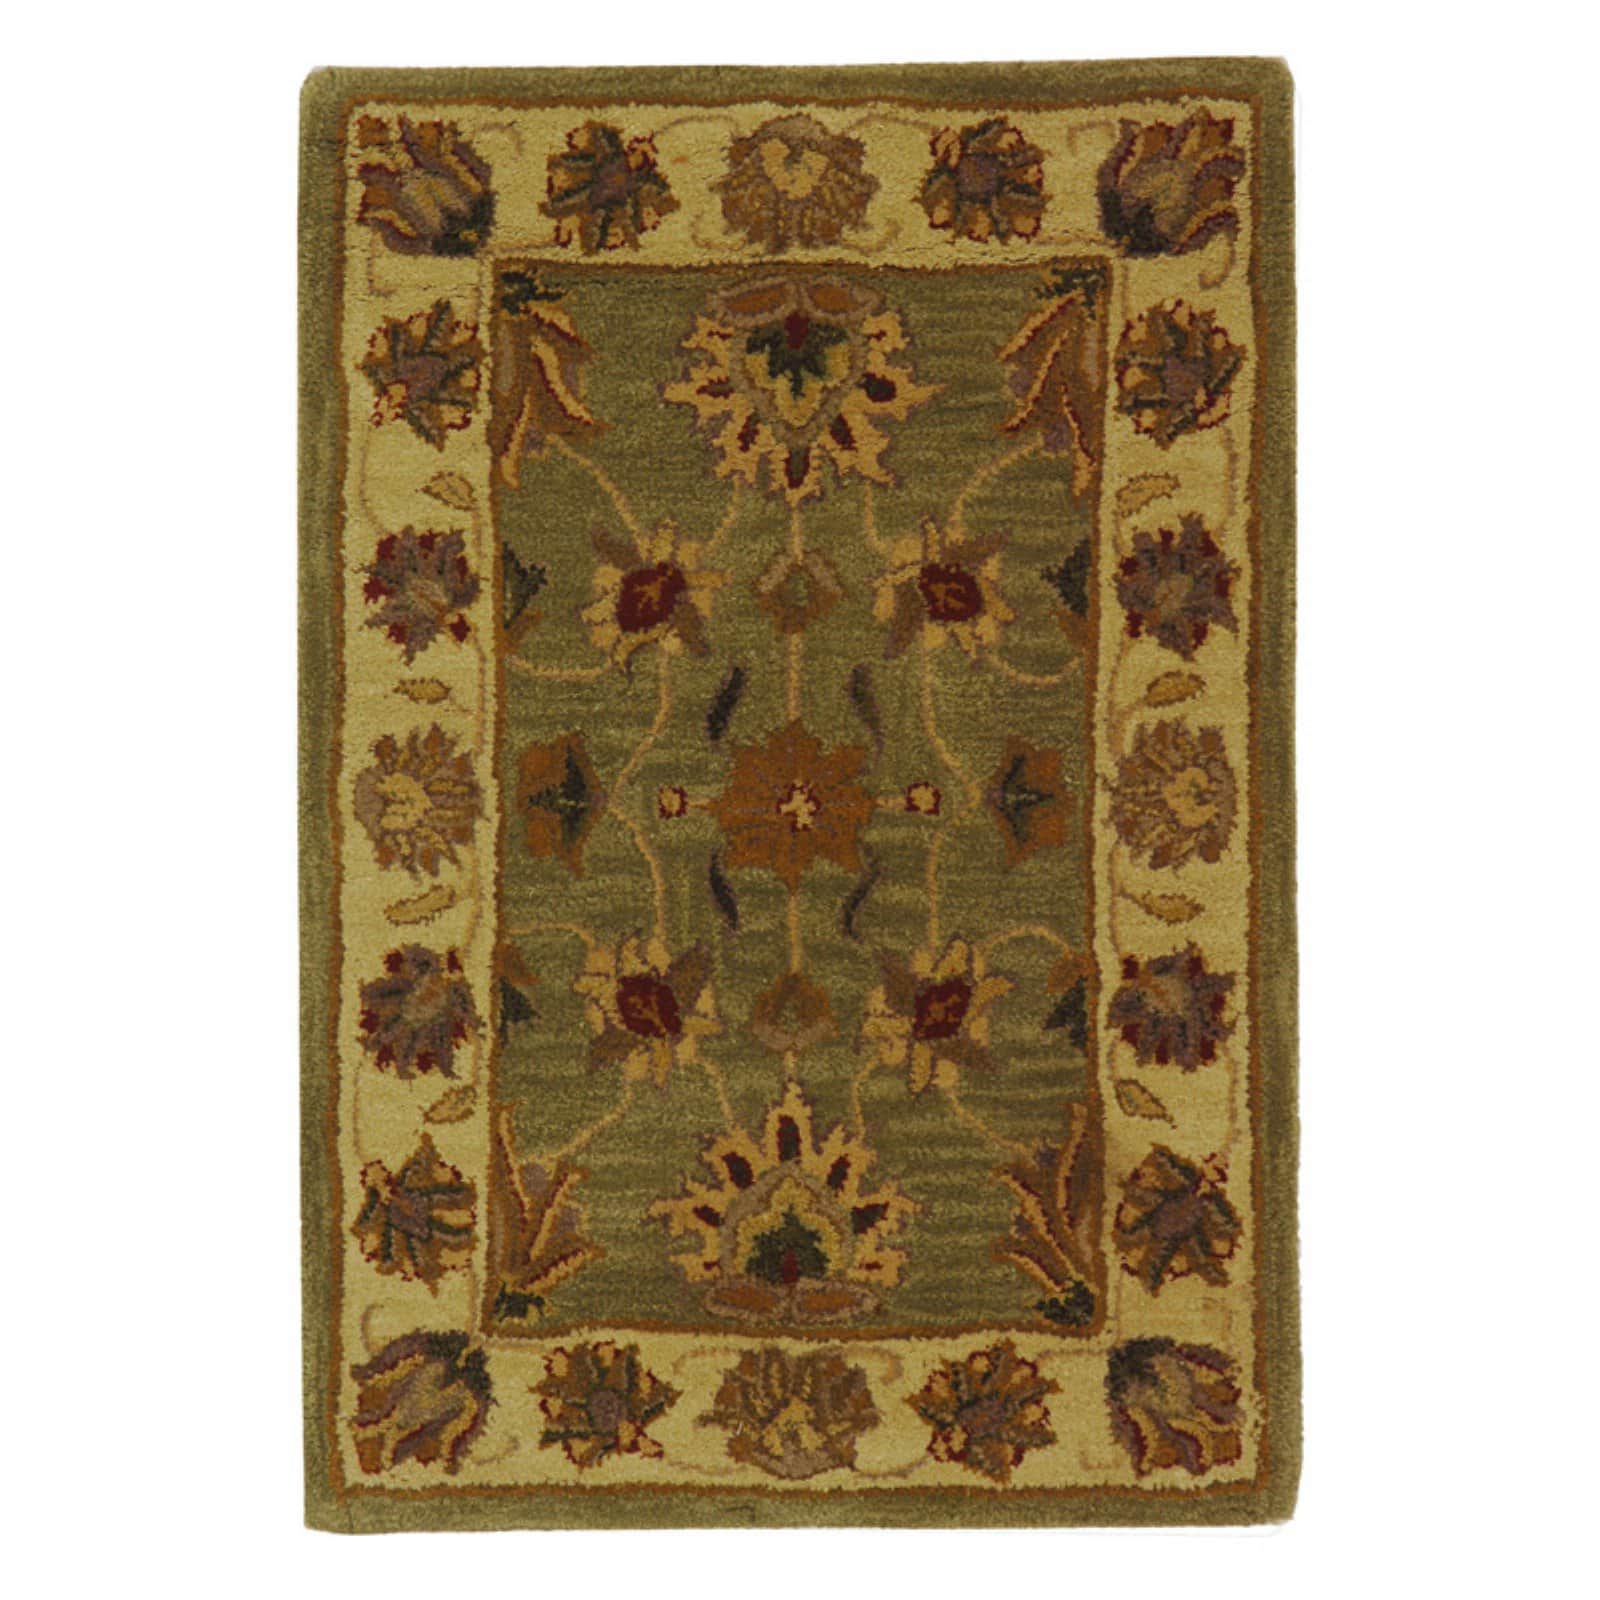 SAFAVIEH Heritage Regis Traditional Wool Area Rug, Green/Gold, 4'6" x 6'6" Oval - image 2 of 10